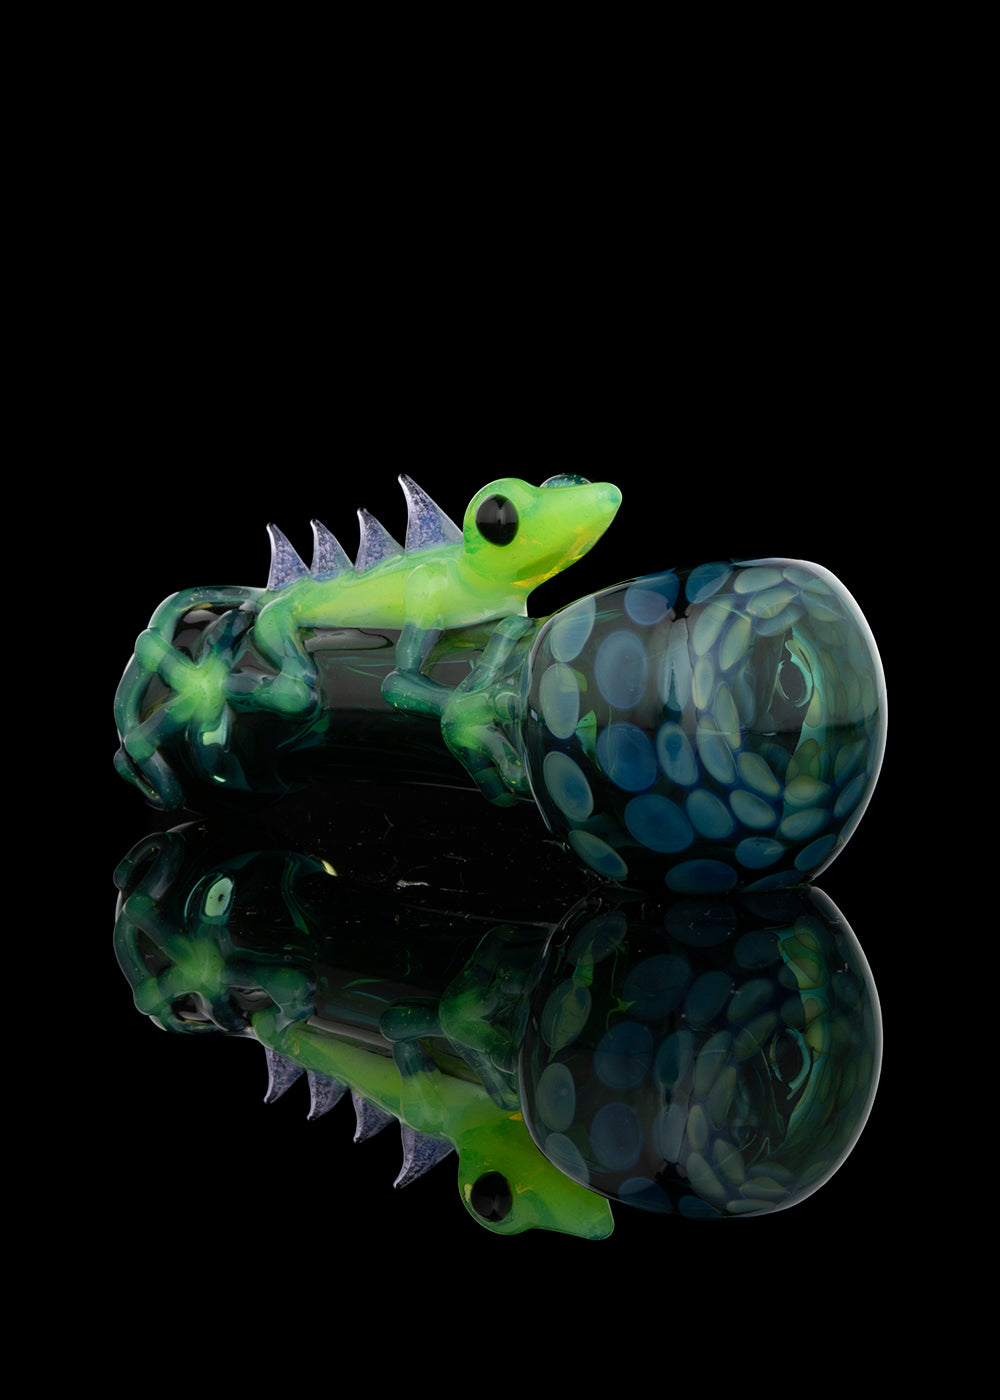 Teal Spoon with Green Slyme Lizard by Curtis Claw